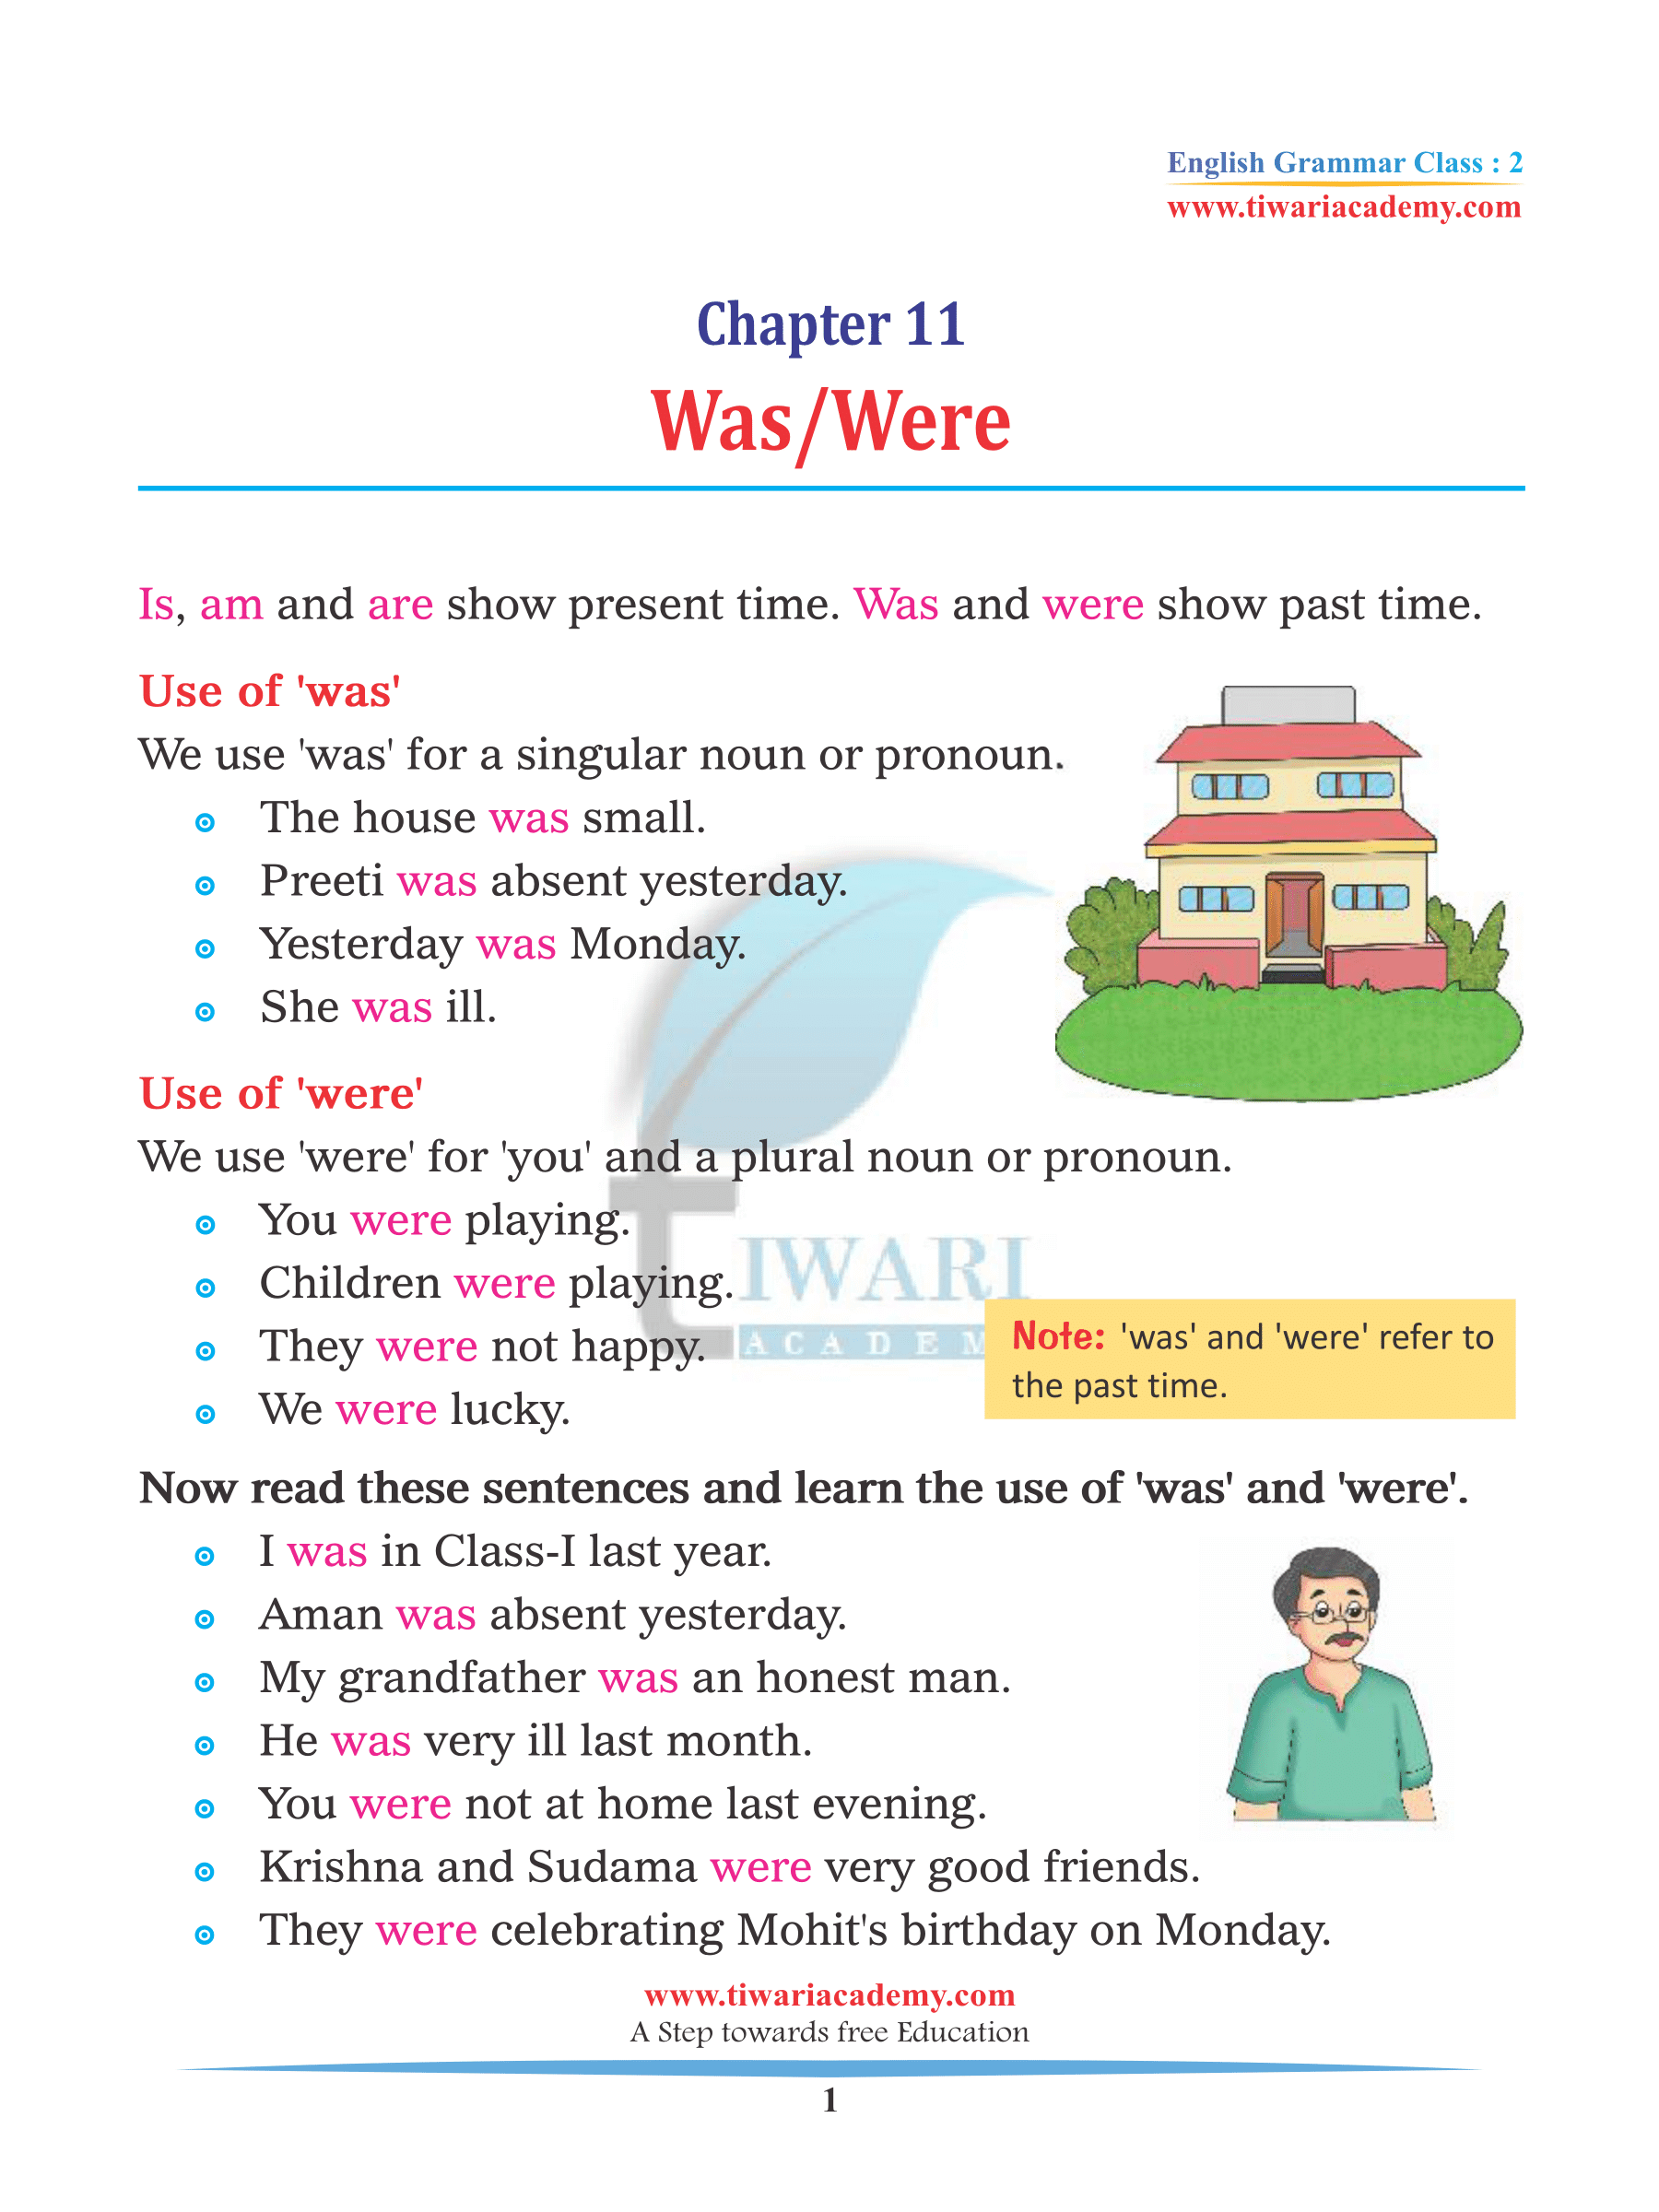 Class 2 English Grammar Chapter 11 Use of was and were